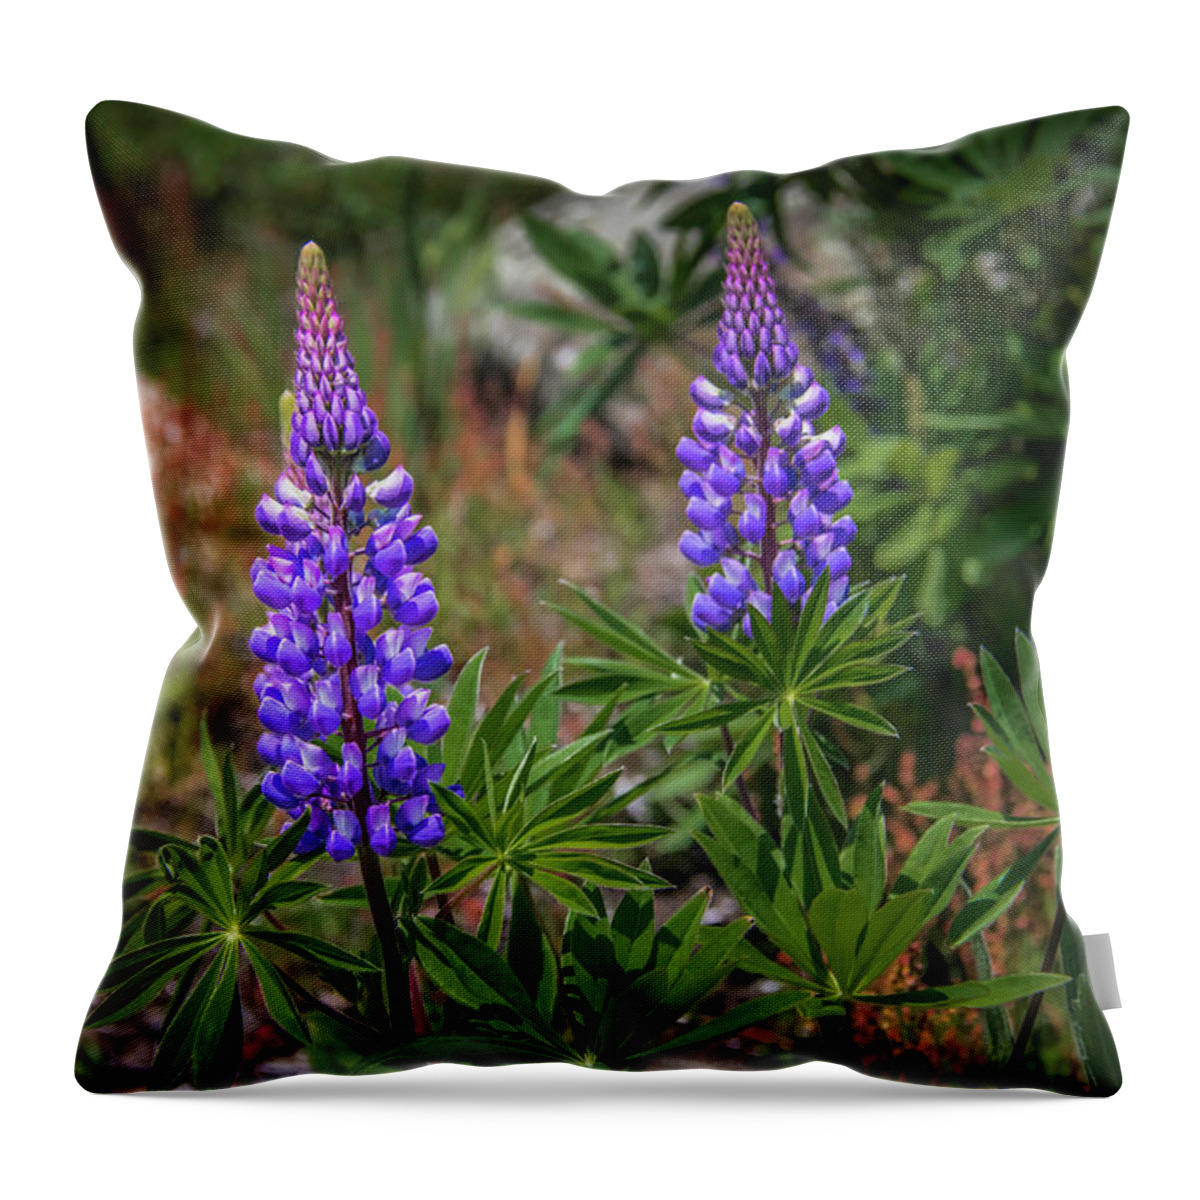 Boorhbay Harbor Throw Pillow featuring the photograph Lupine by Guy Whiteley